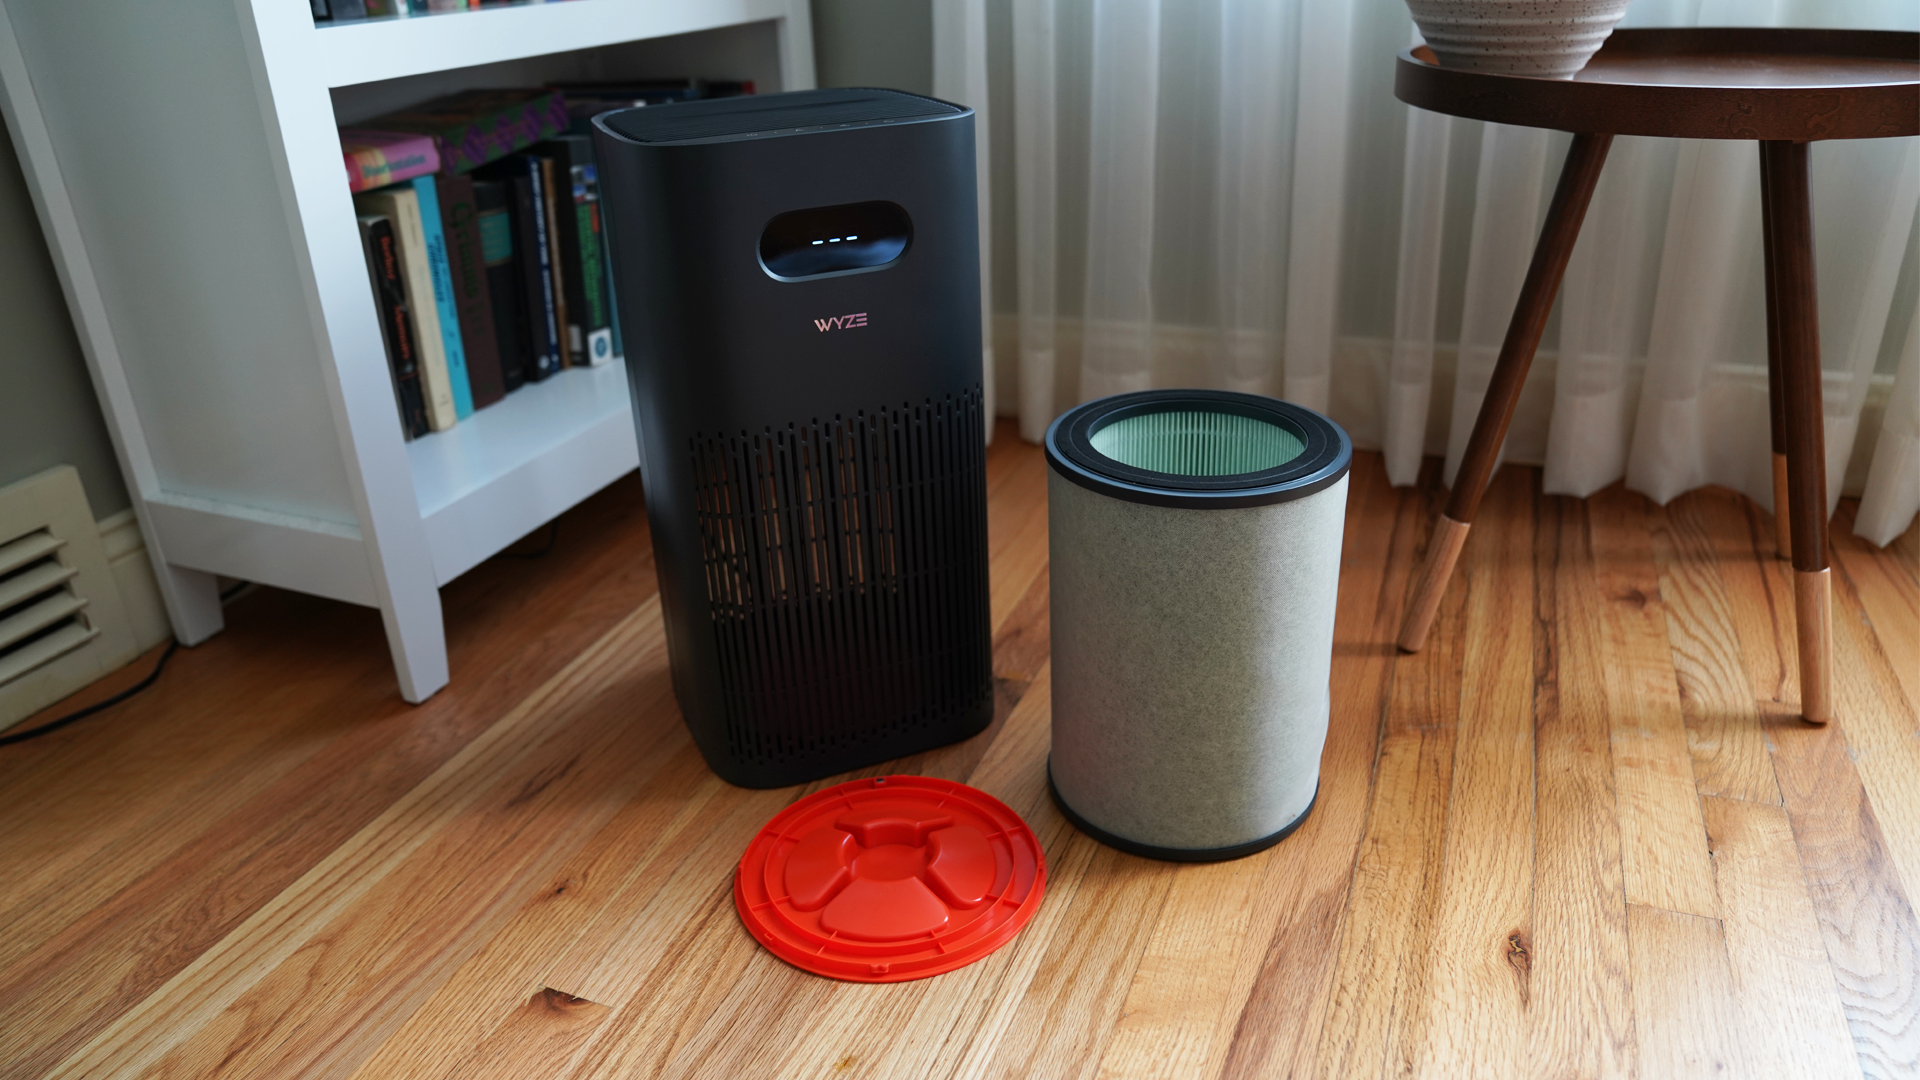 The Wyze Air Purifier next to its Allergen filter and filter compartment seal in a bright living room..